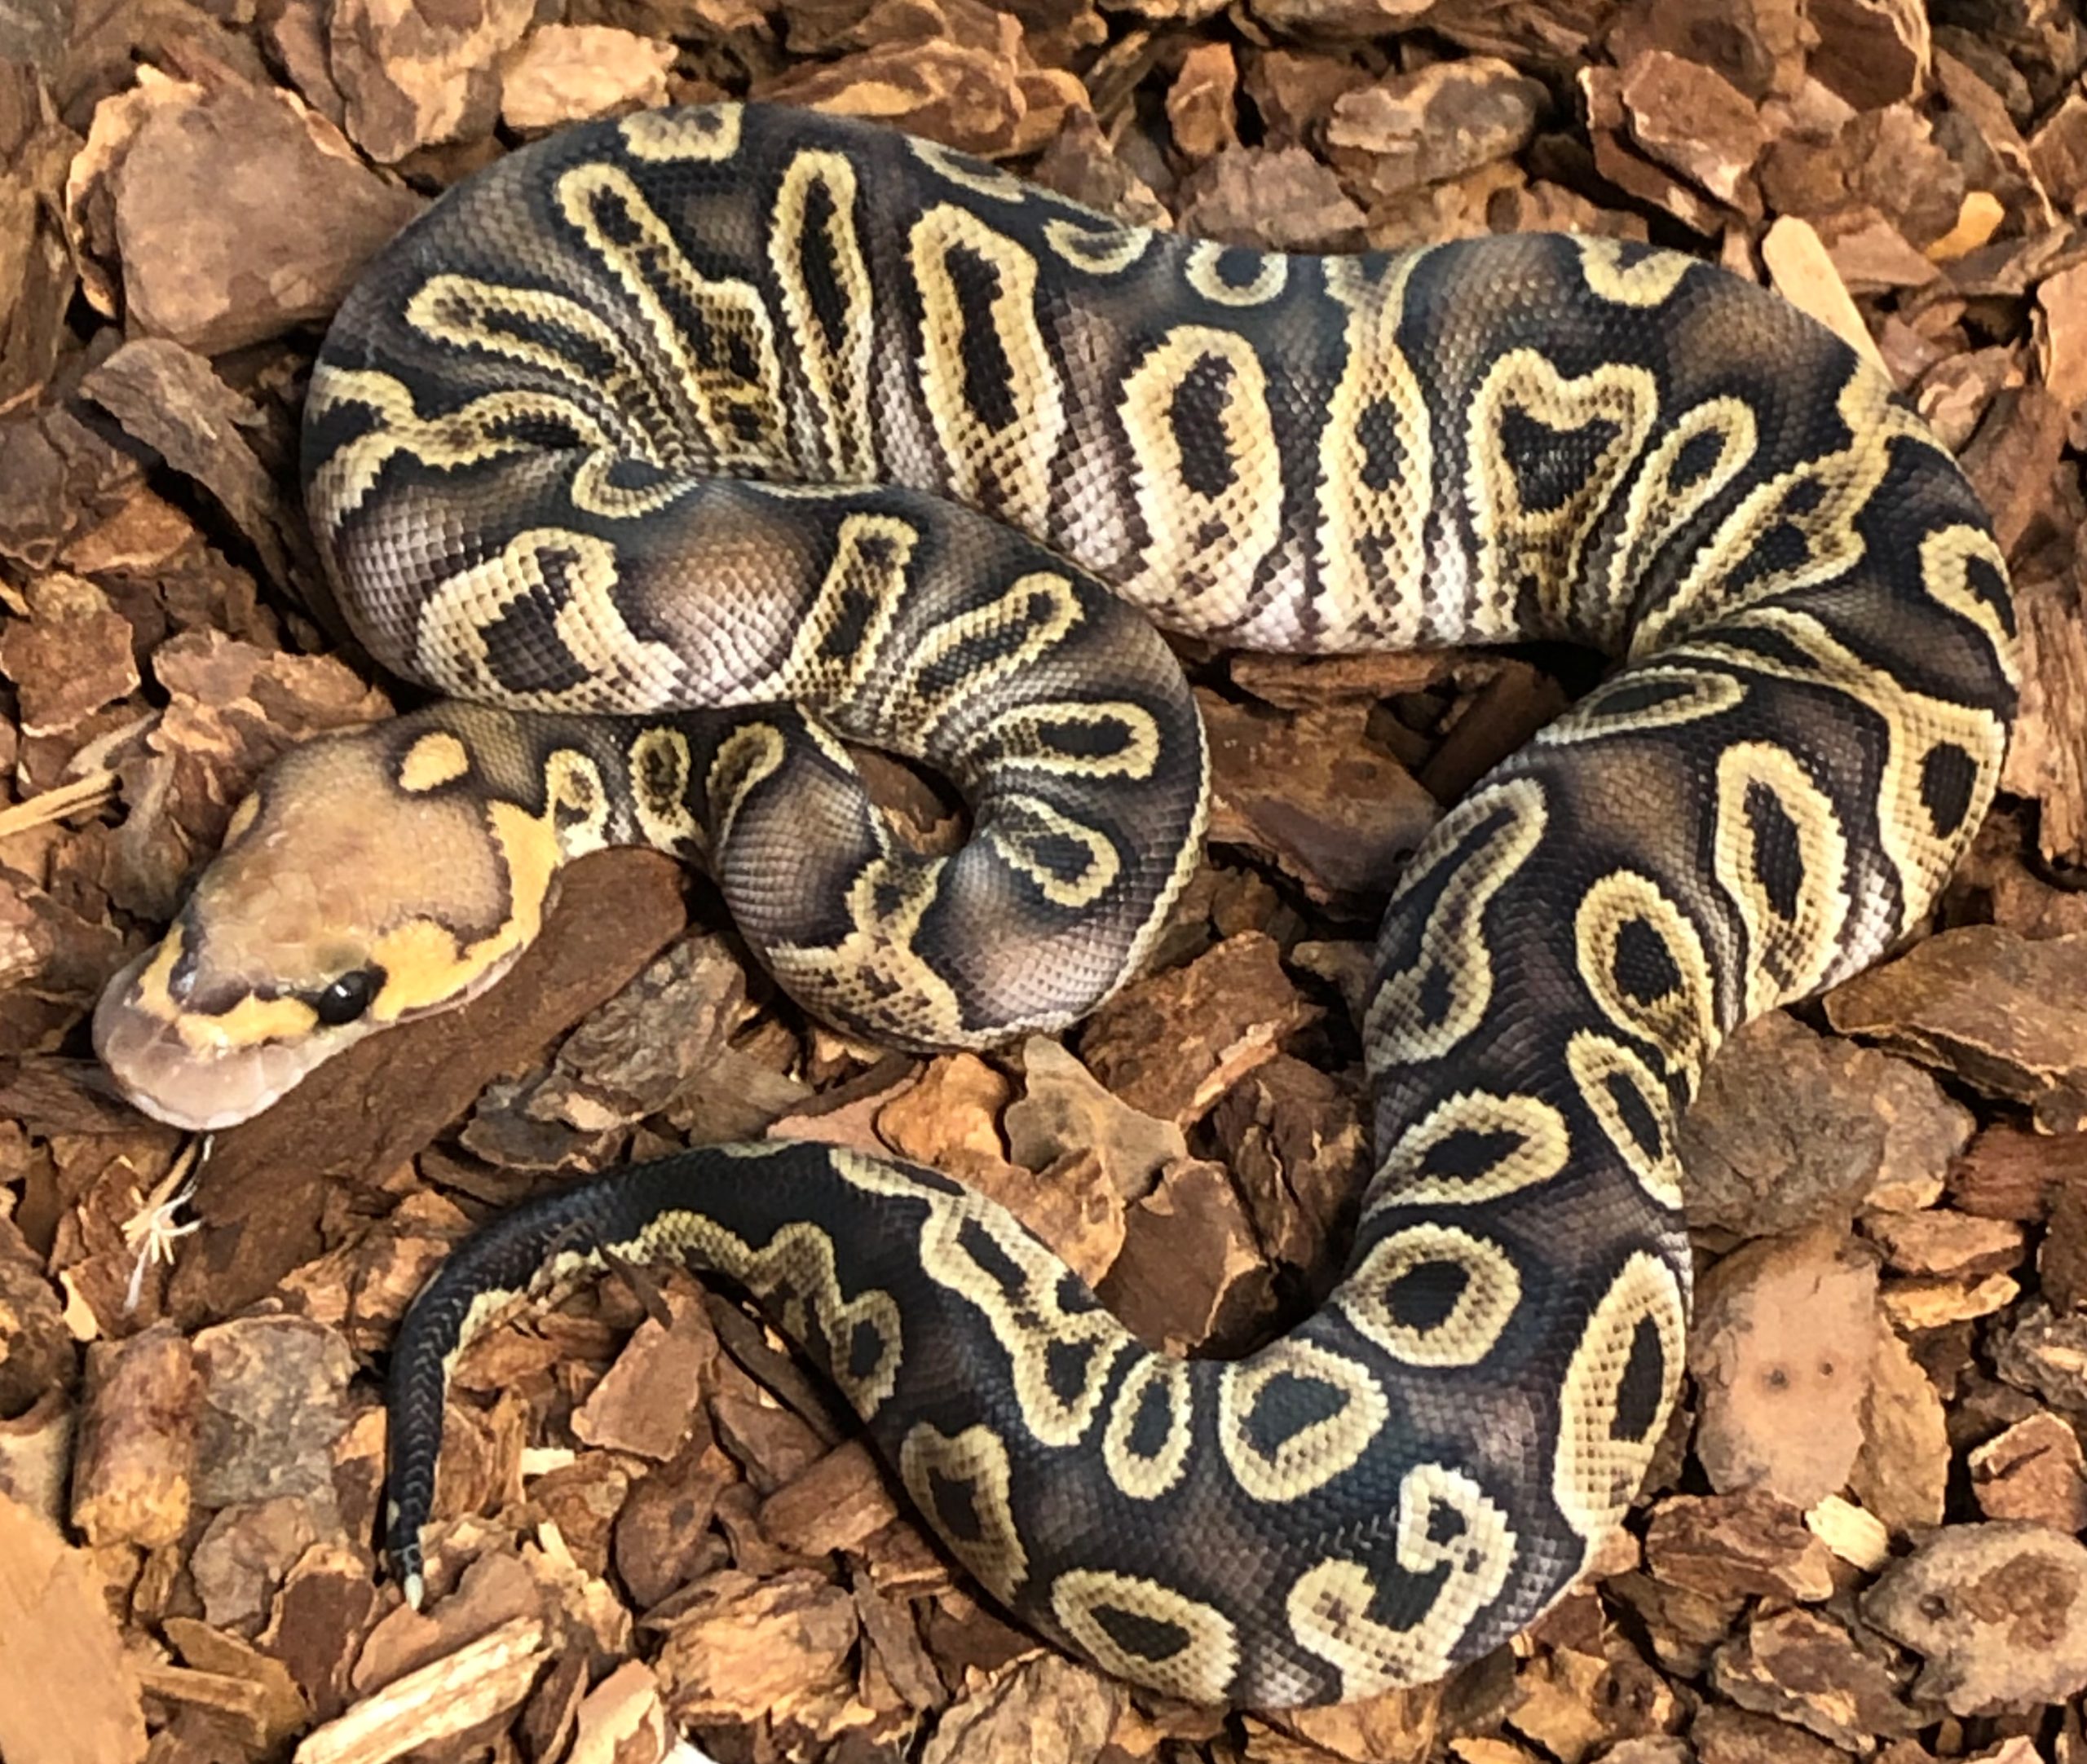 snakes-for-sale-GHI Clown